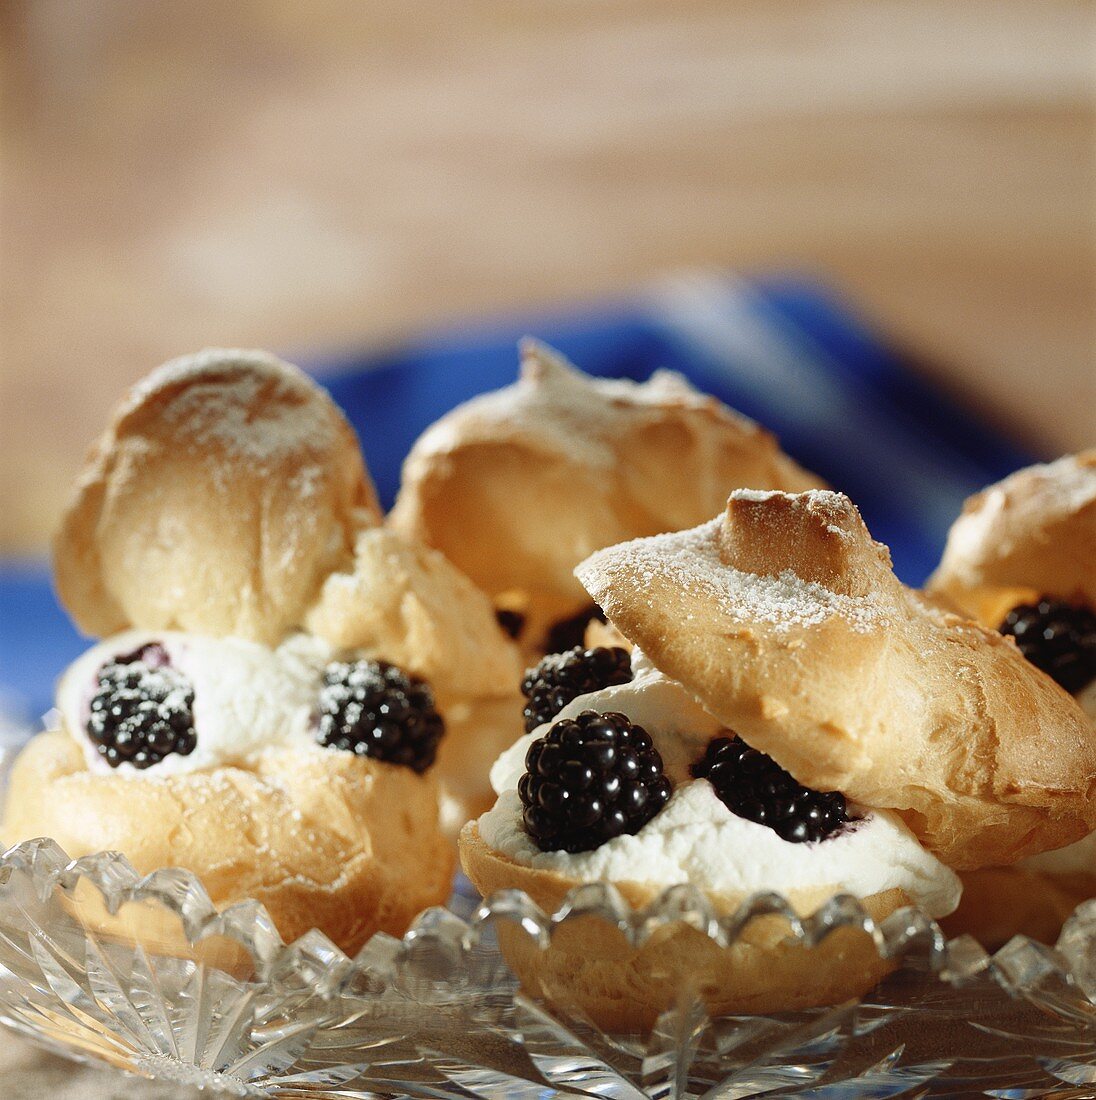 Cream puffs with cream and blackberries